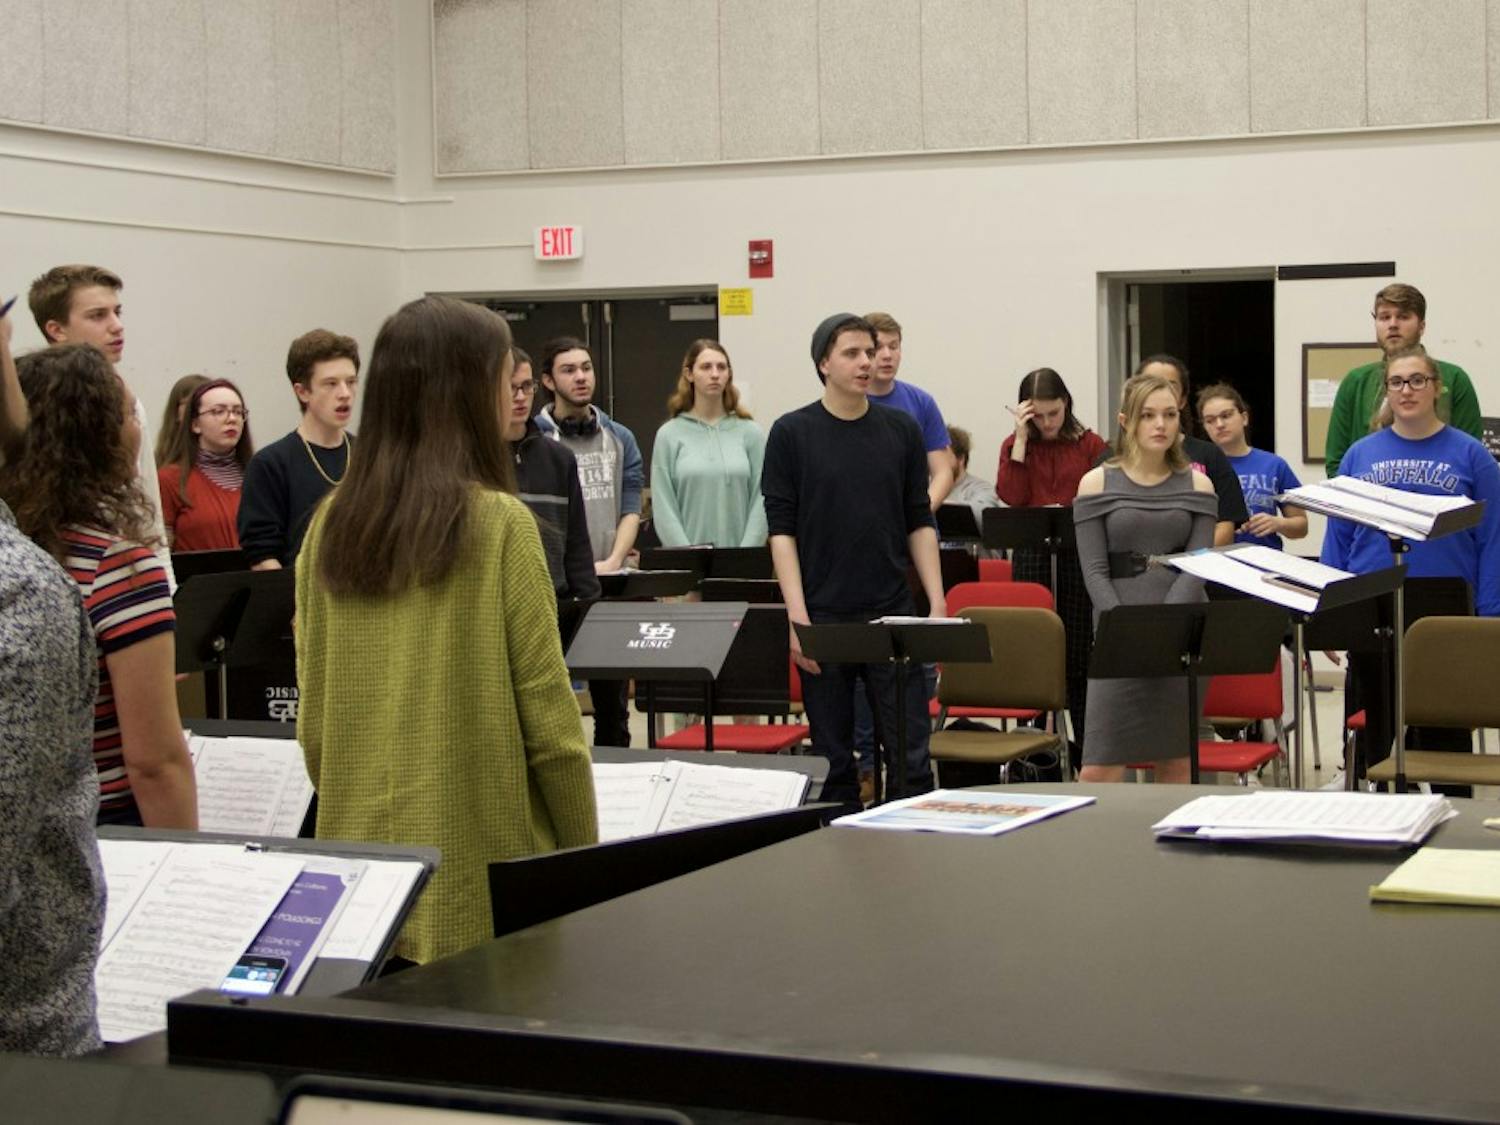 “Love Songs from the British Isles” aims to combine catchy melodies with tales of love, mixing works from Scottish and Irish origin. Choir Director Claudia Brown hopes his showing will raise the stock of UB Choir both on campus and around the greater Buffalo area.